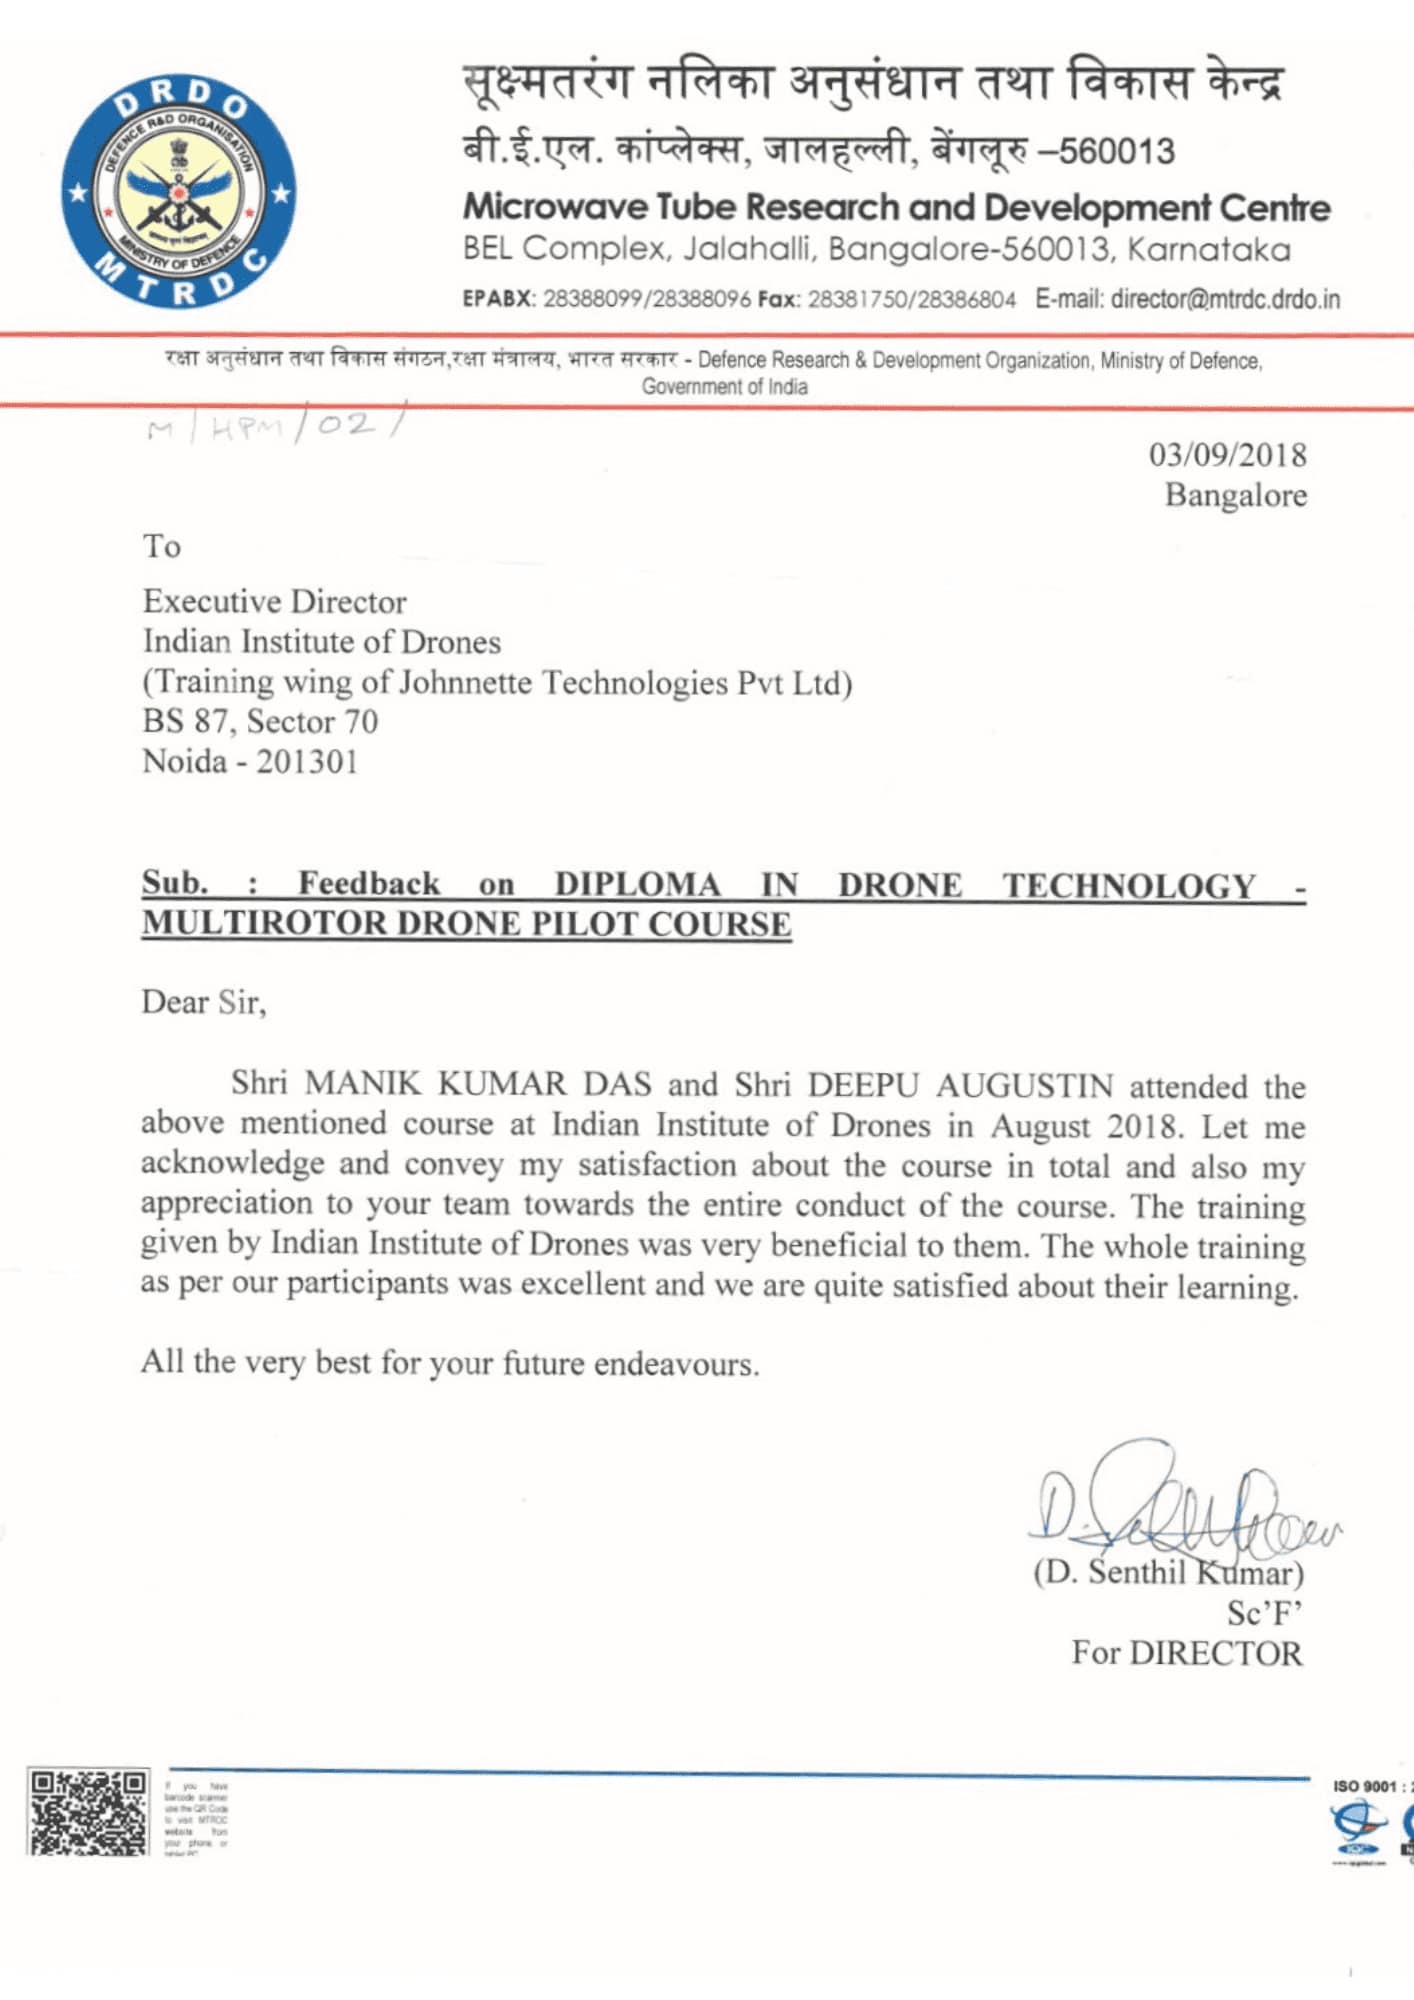 Satisfactory Letter for Drone Training Received from MTRC, DRDO